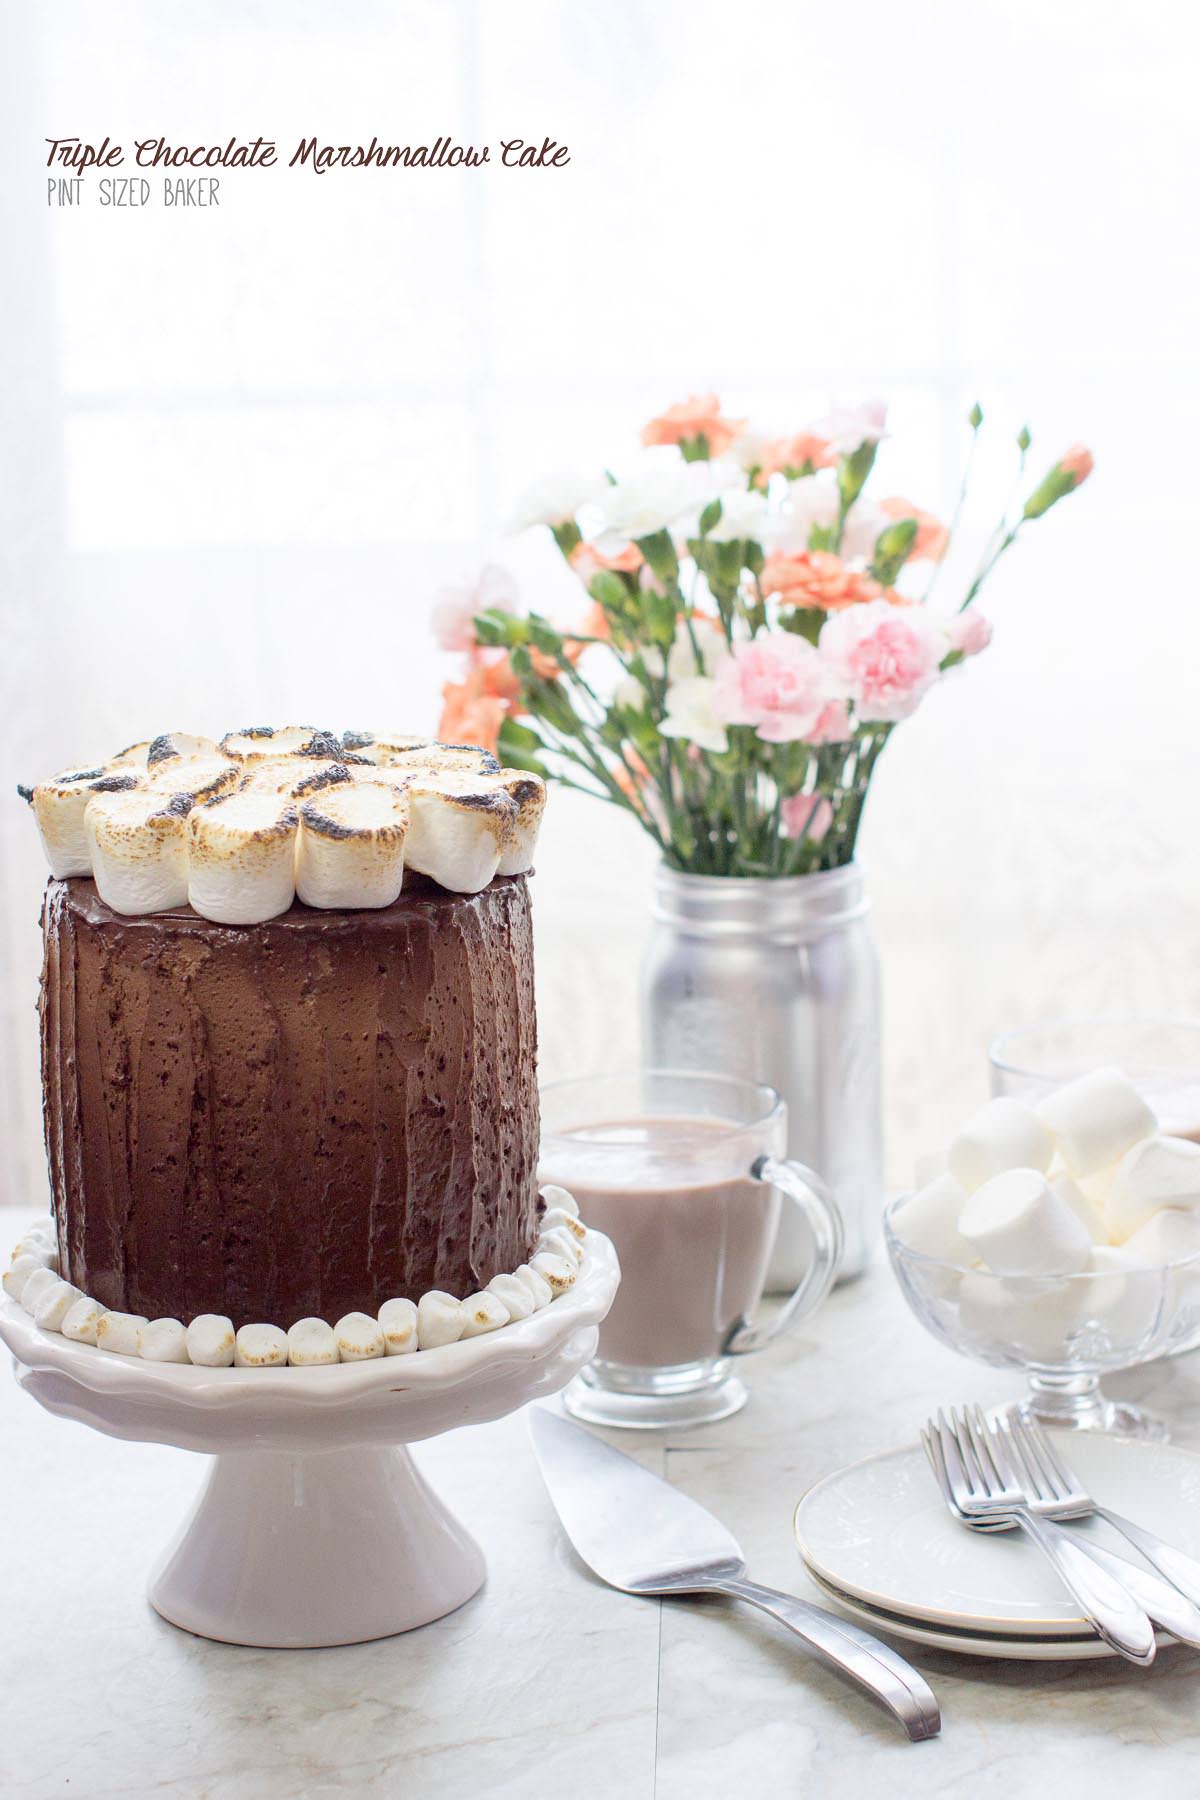 This Triple Chocolate Marshmallow Cake is full of great milk chocolate flavor with fun toasted marshmallows on top. It was a winner for dessert!